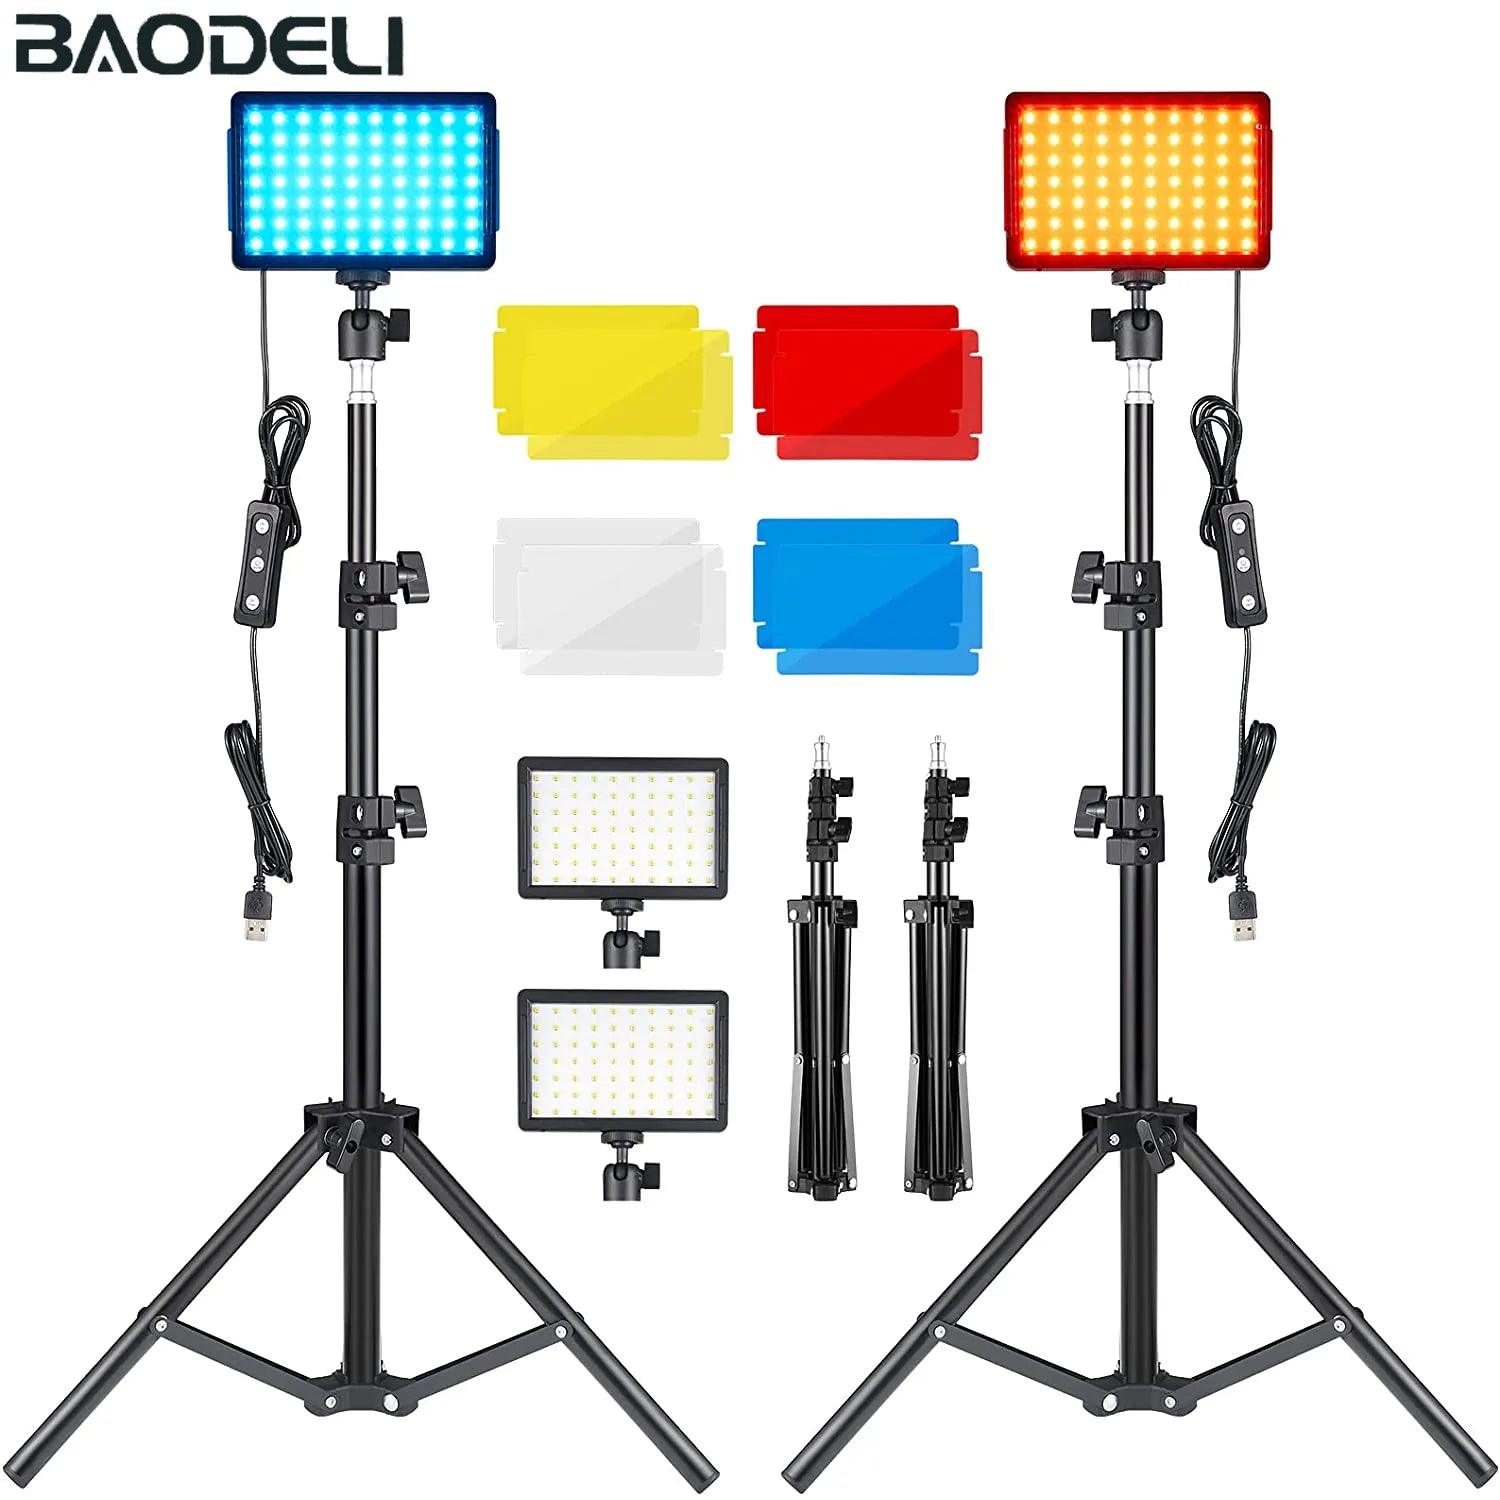 RGB LED Video Light Panel Kit with Stand for Photography and Live Streaming, Includes Filters  ourlum.com   